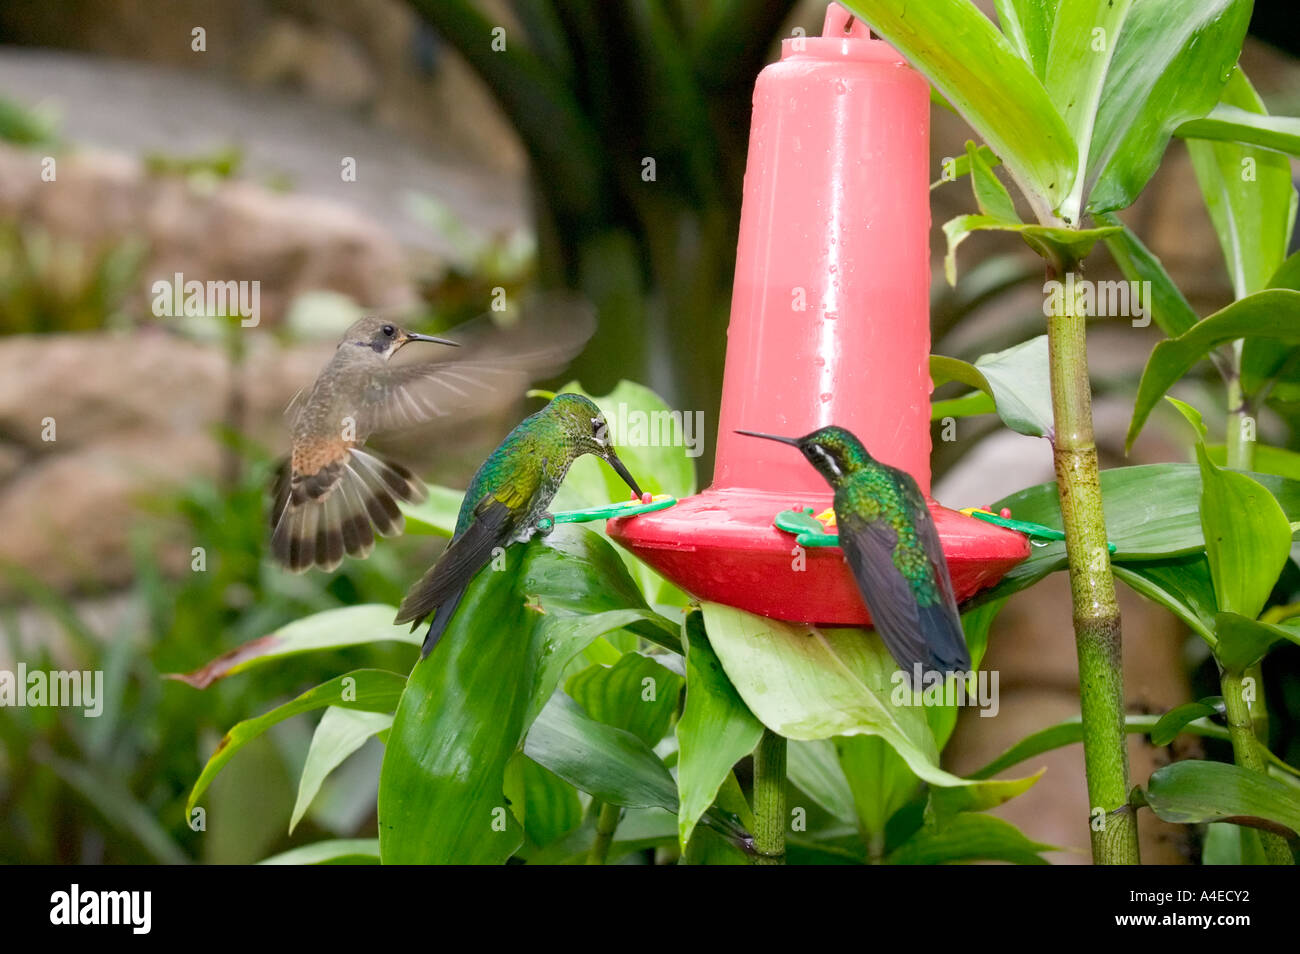 Hummingbird on feeder and in flight, La Paz Waterfall Gardens, Valle Central & Highlands, Costa Rica Stock Photo